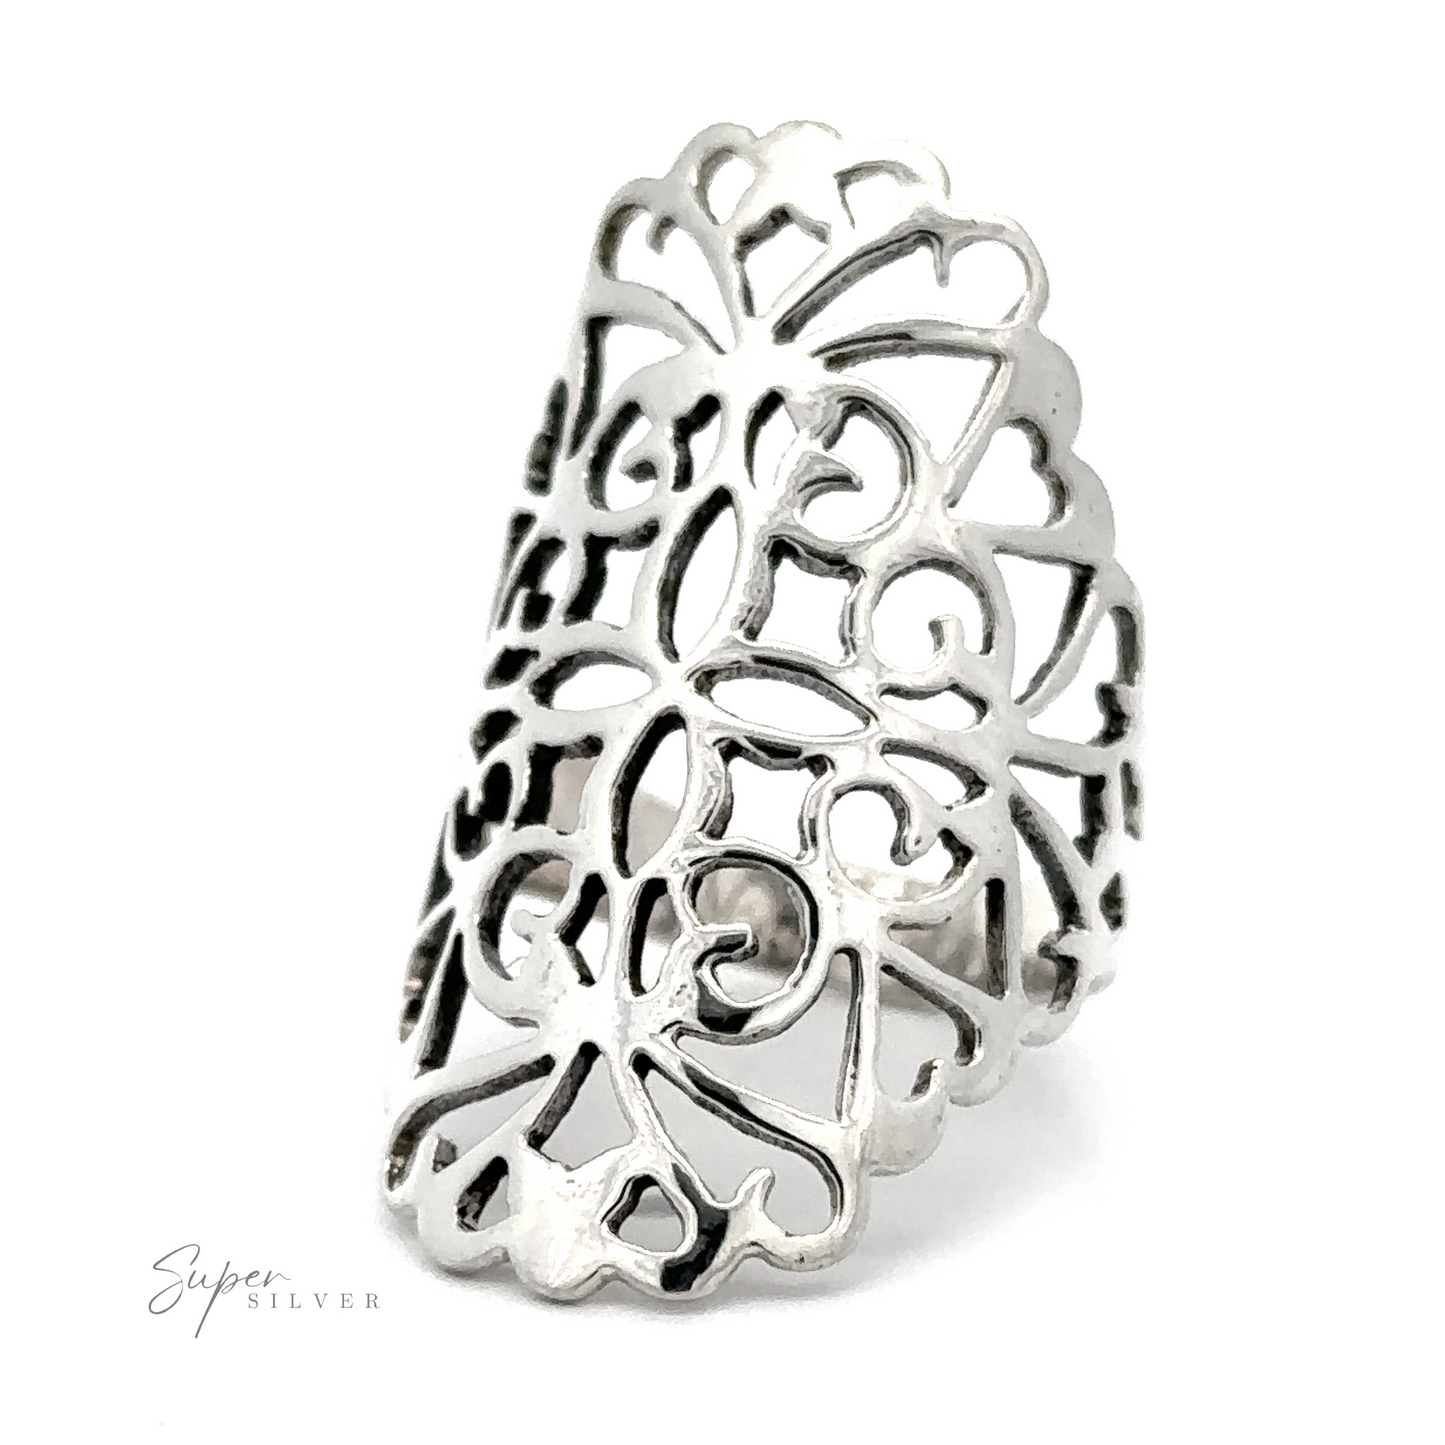 A Filigree Shield Ring with a romantic vintage flair and intricate design.